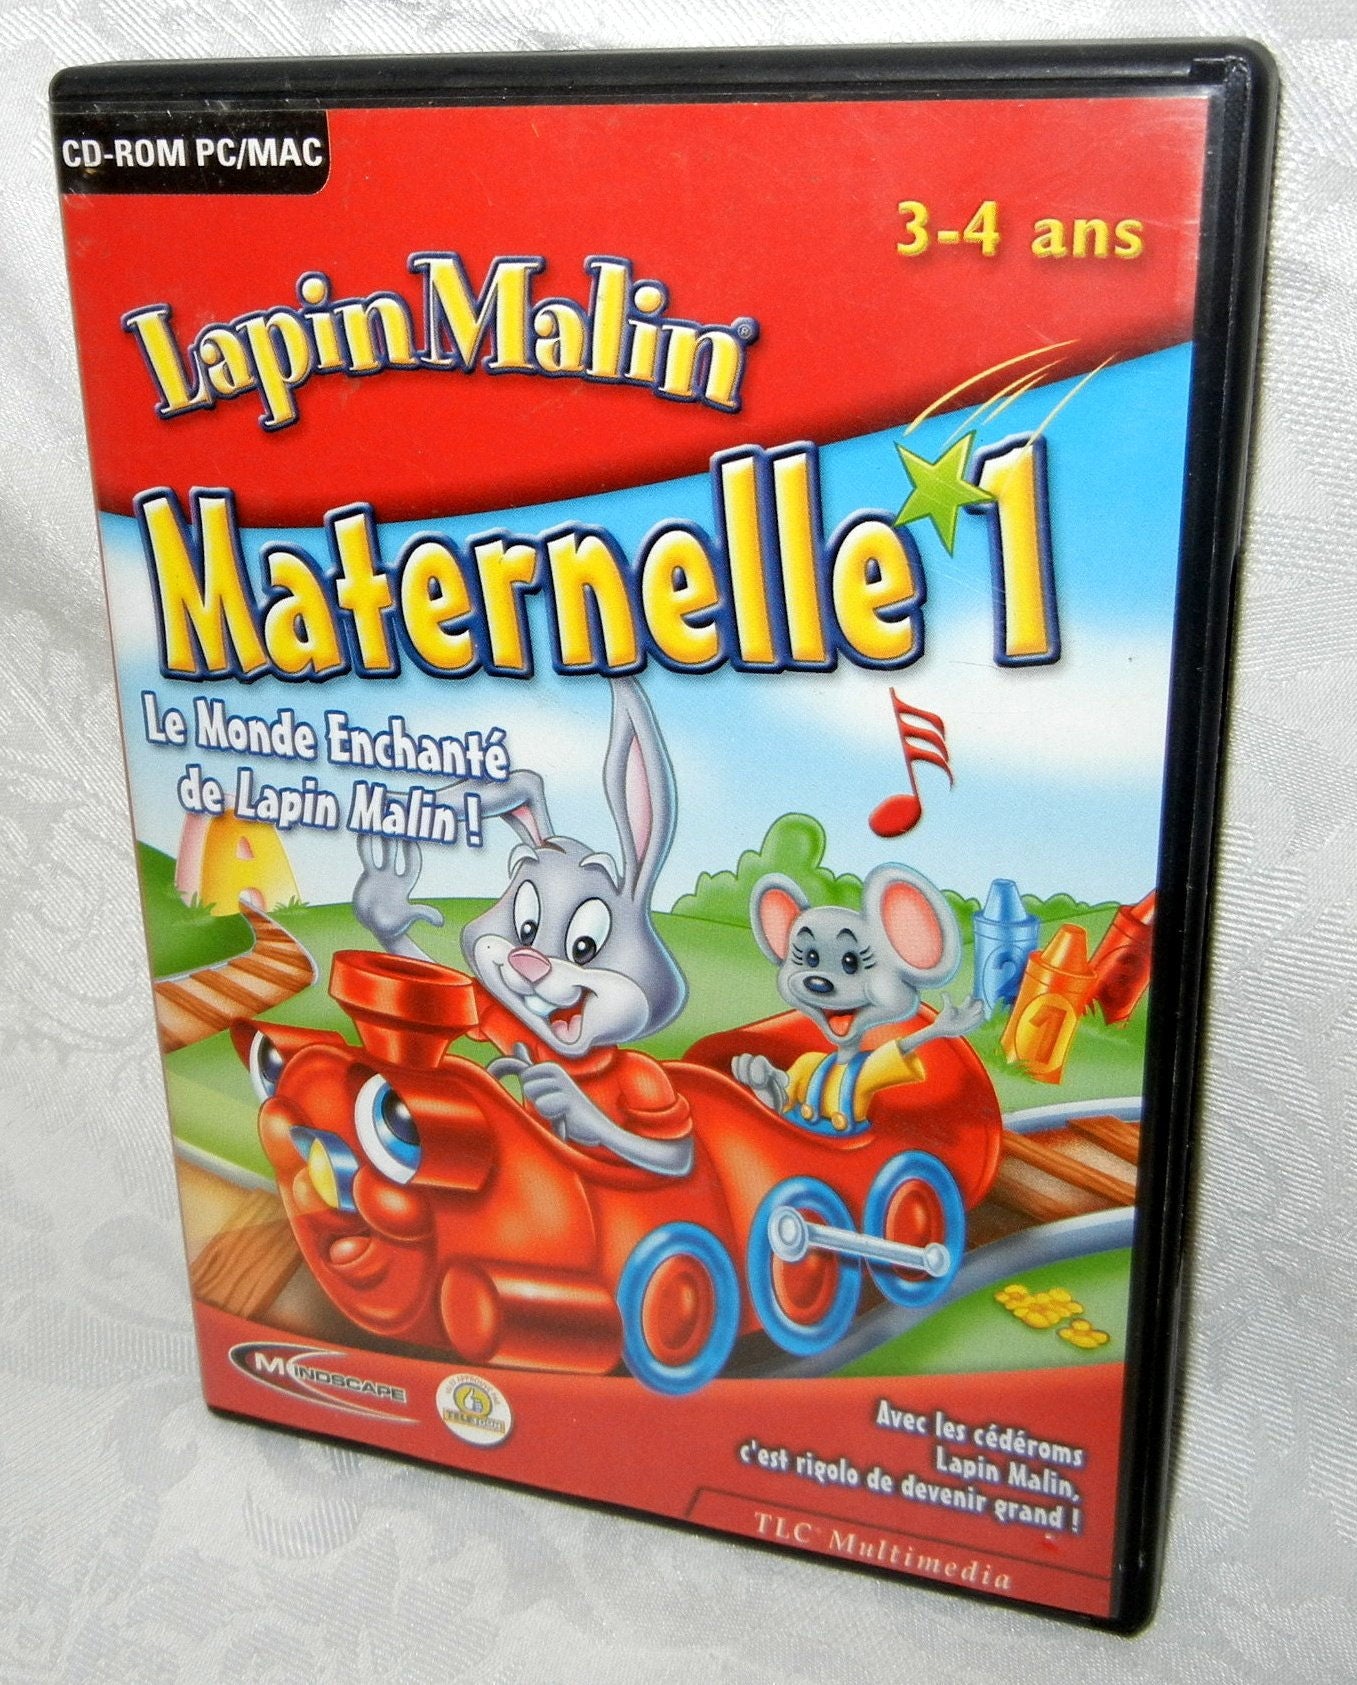 Lapin malin cours elementaire 1 dvd neuf 6 - 8 ans